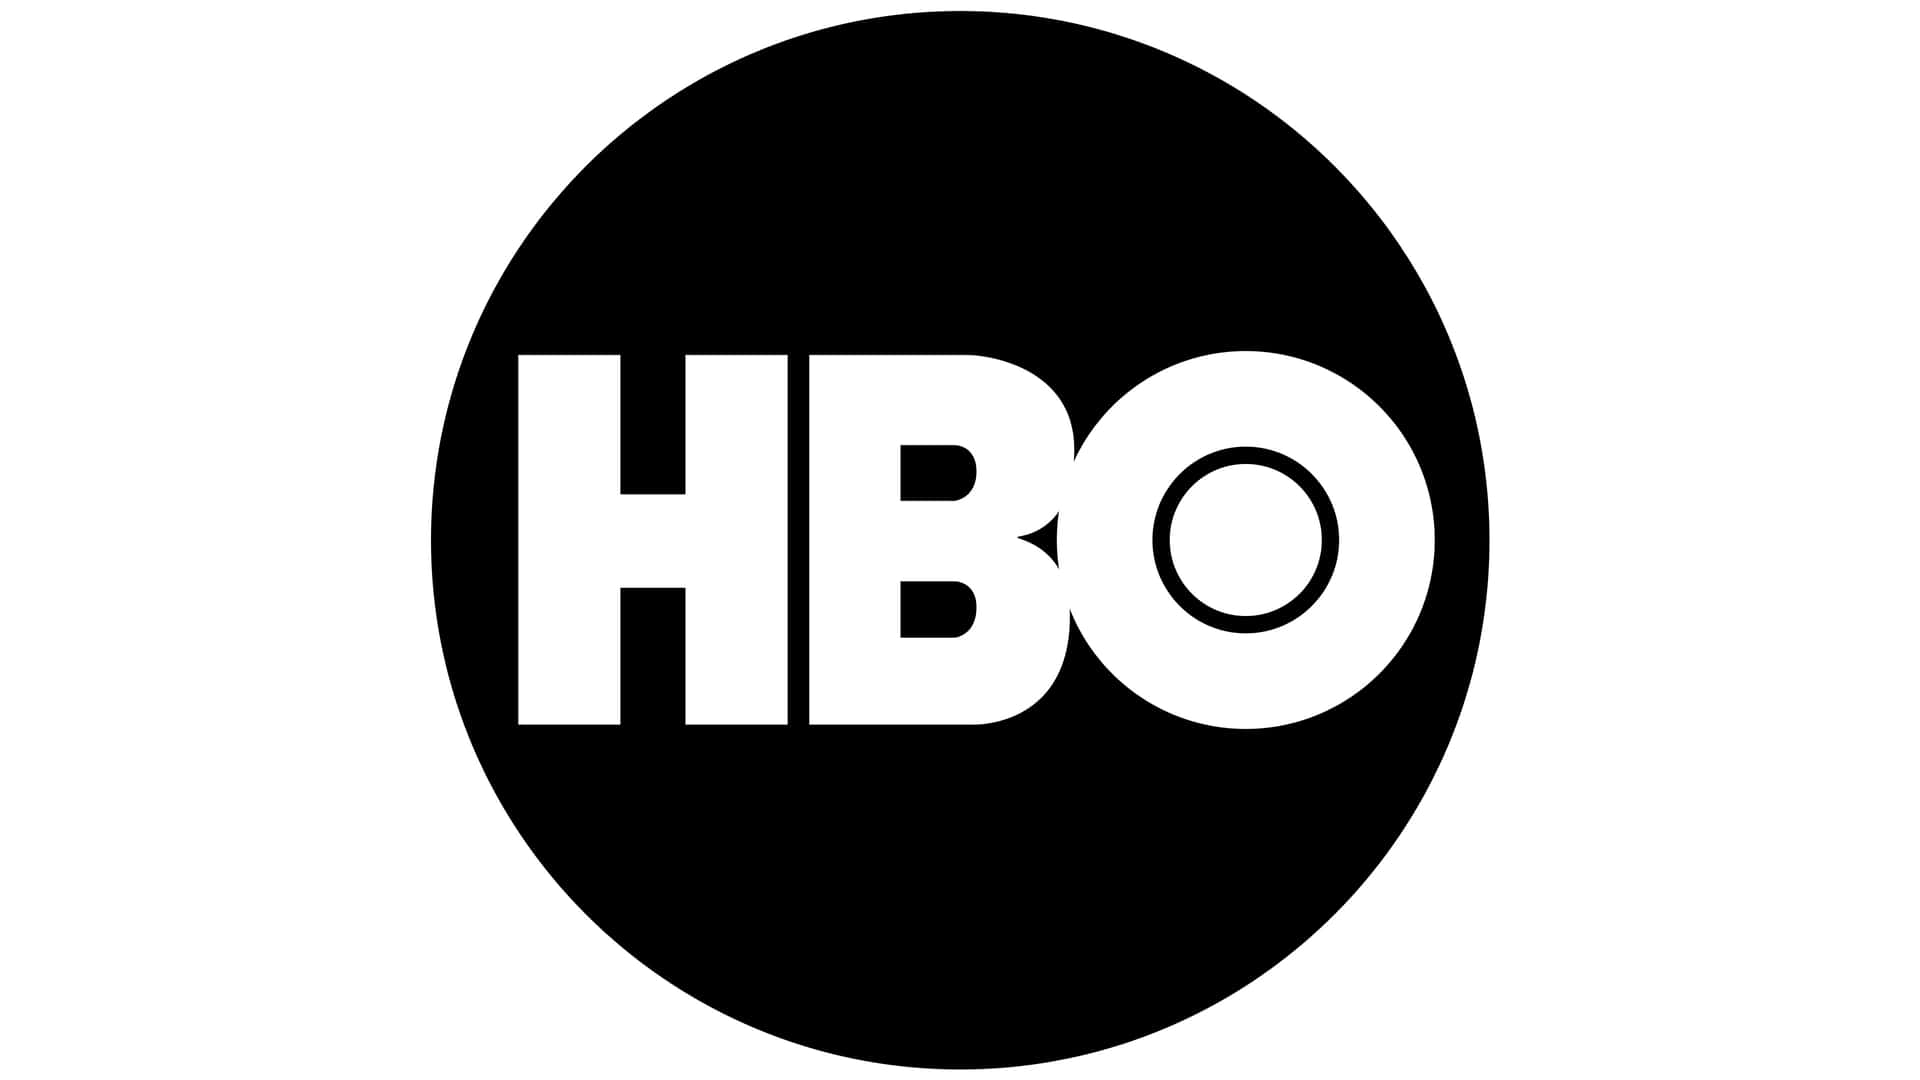 Get ready to explore your favourite HBO shows